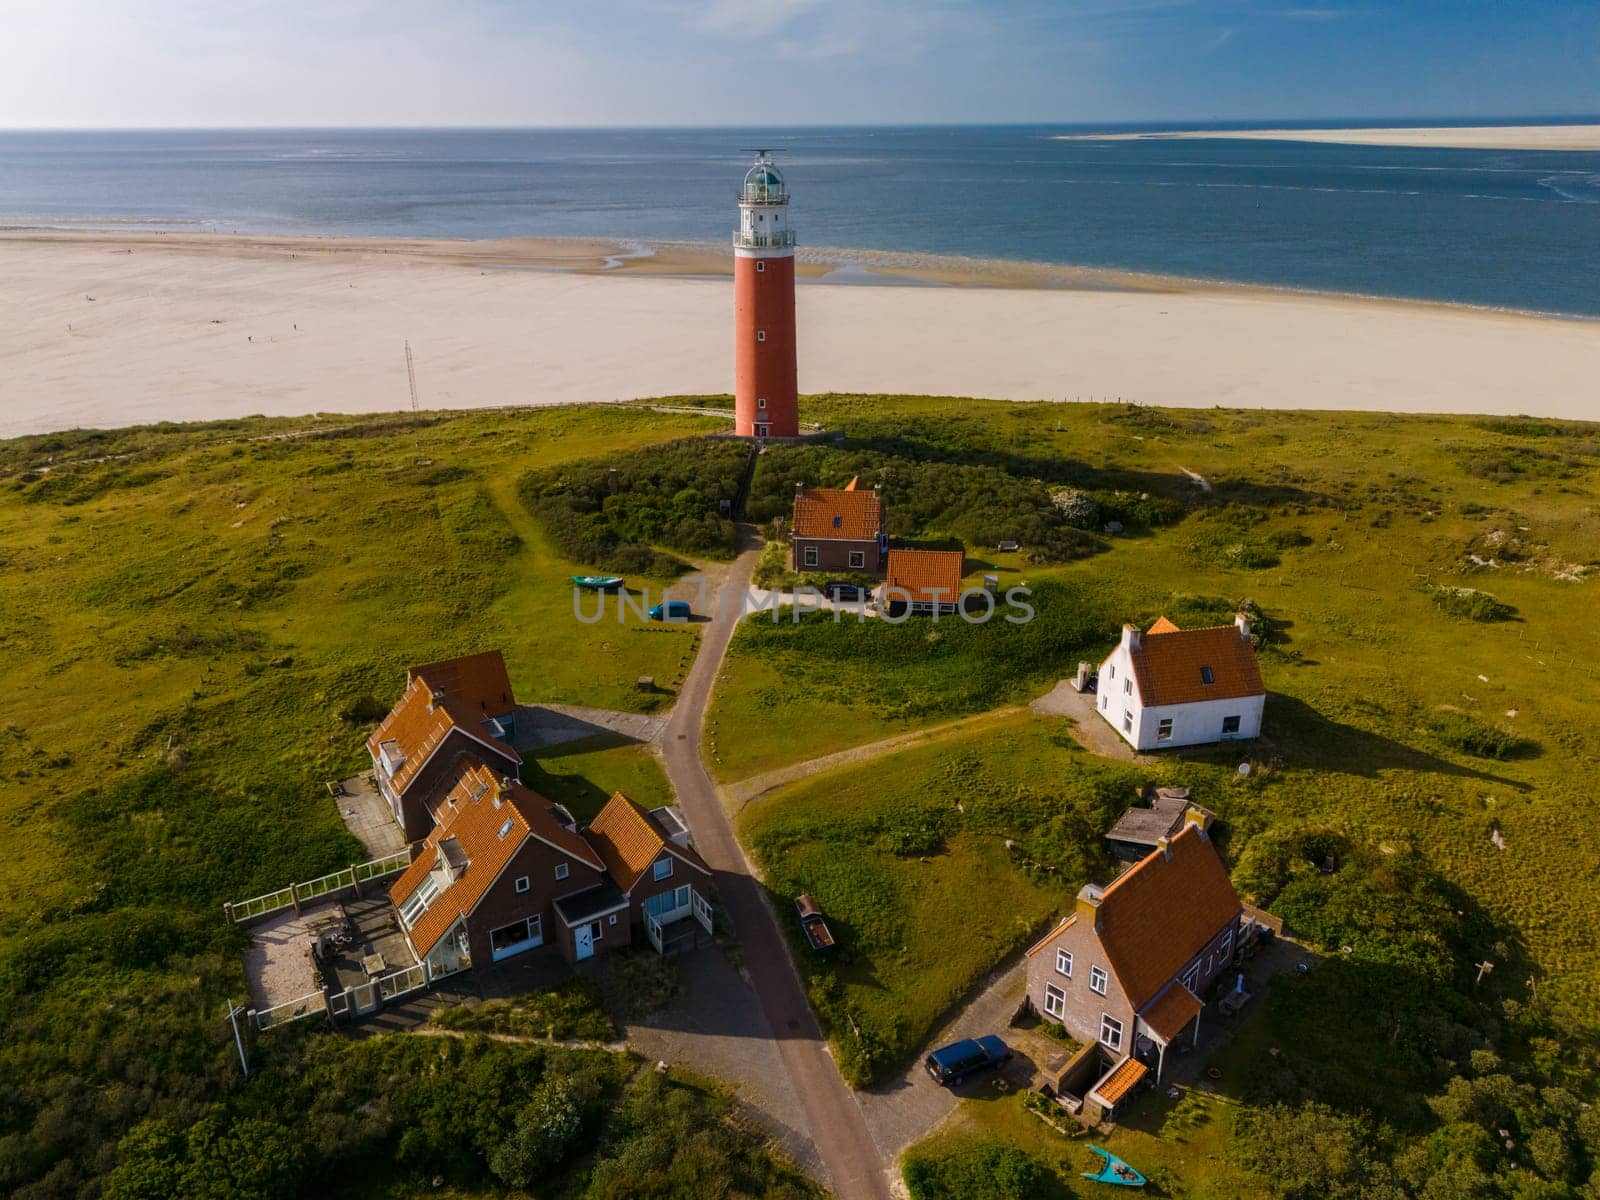 An awe-inspiring aerial view of a majestic lighthouse standing tall amidst the sandy shores of Texel, Netherlands.